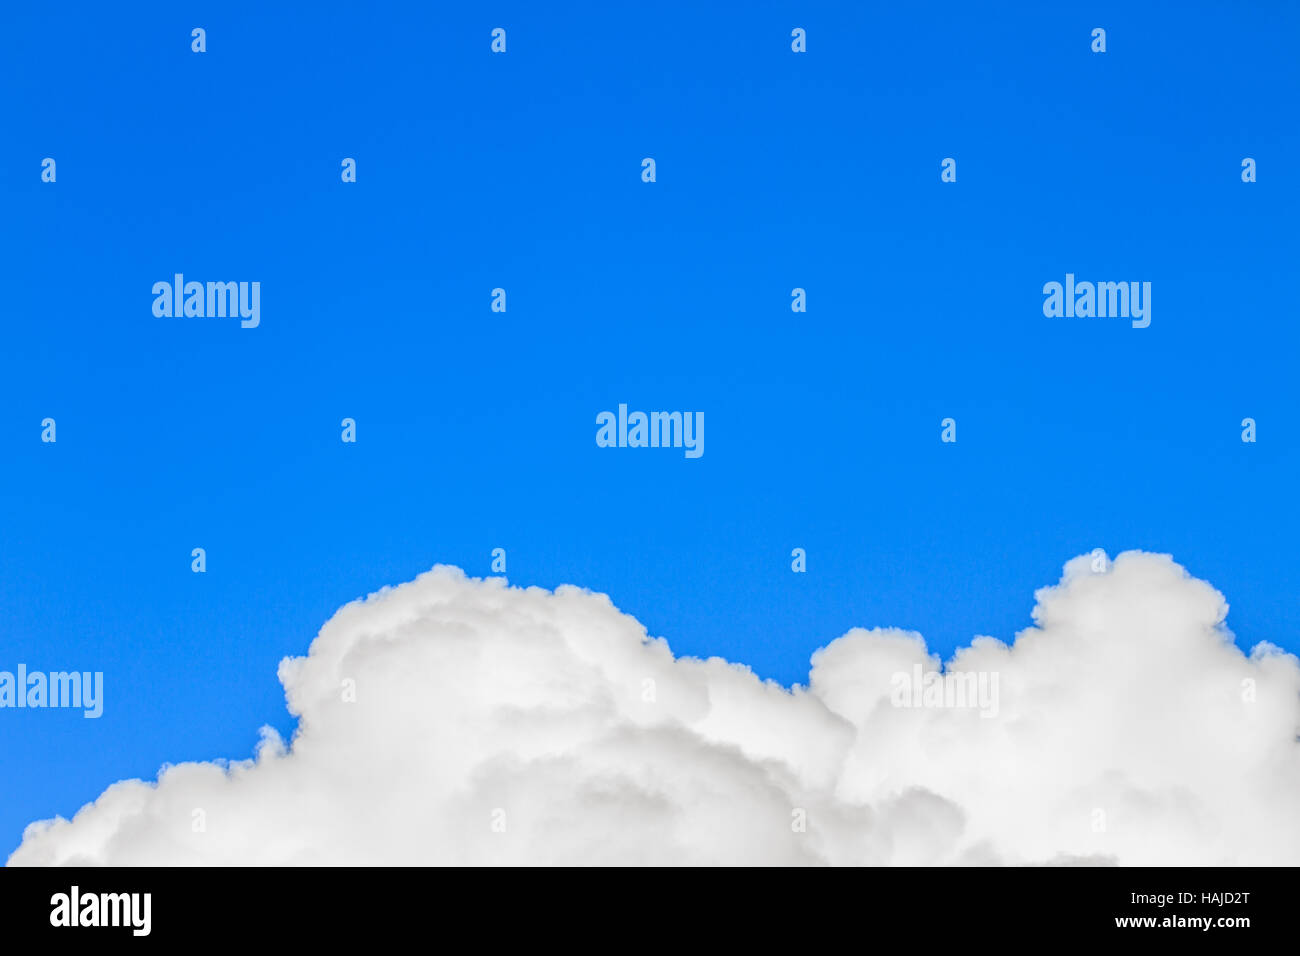 blue sky with white clouds. can be used as background Stock Photo